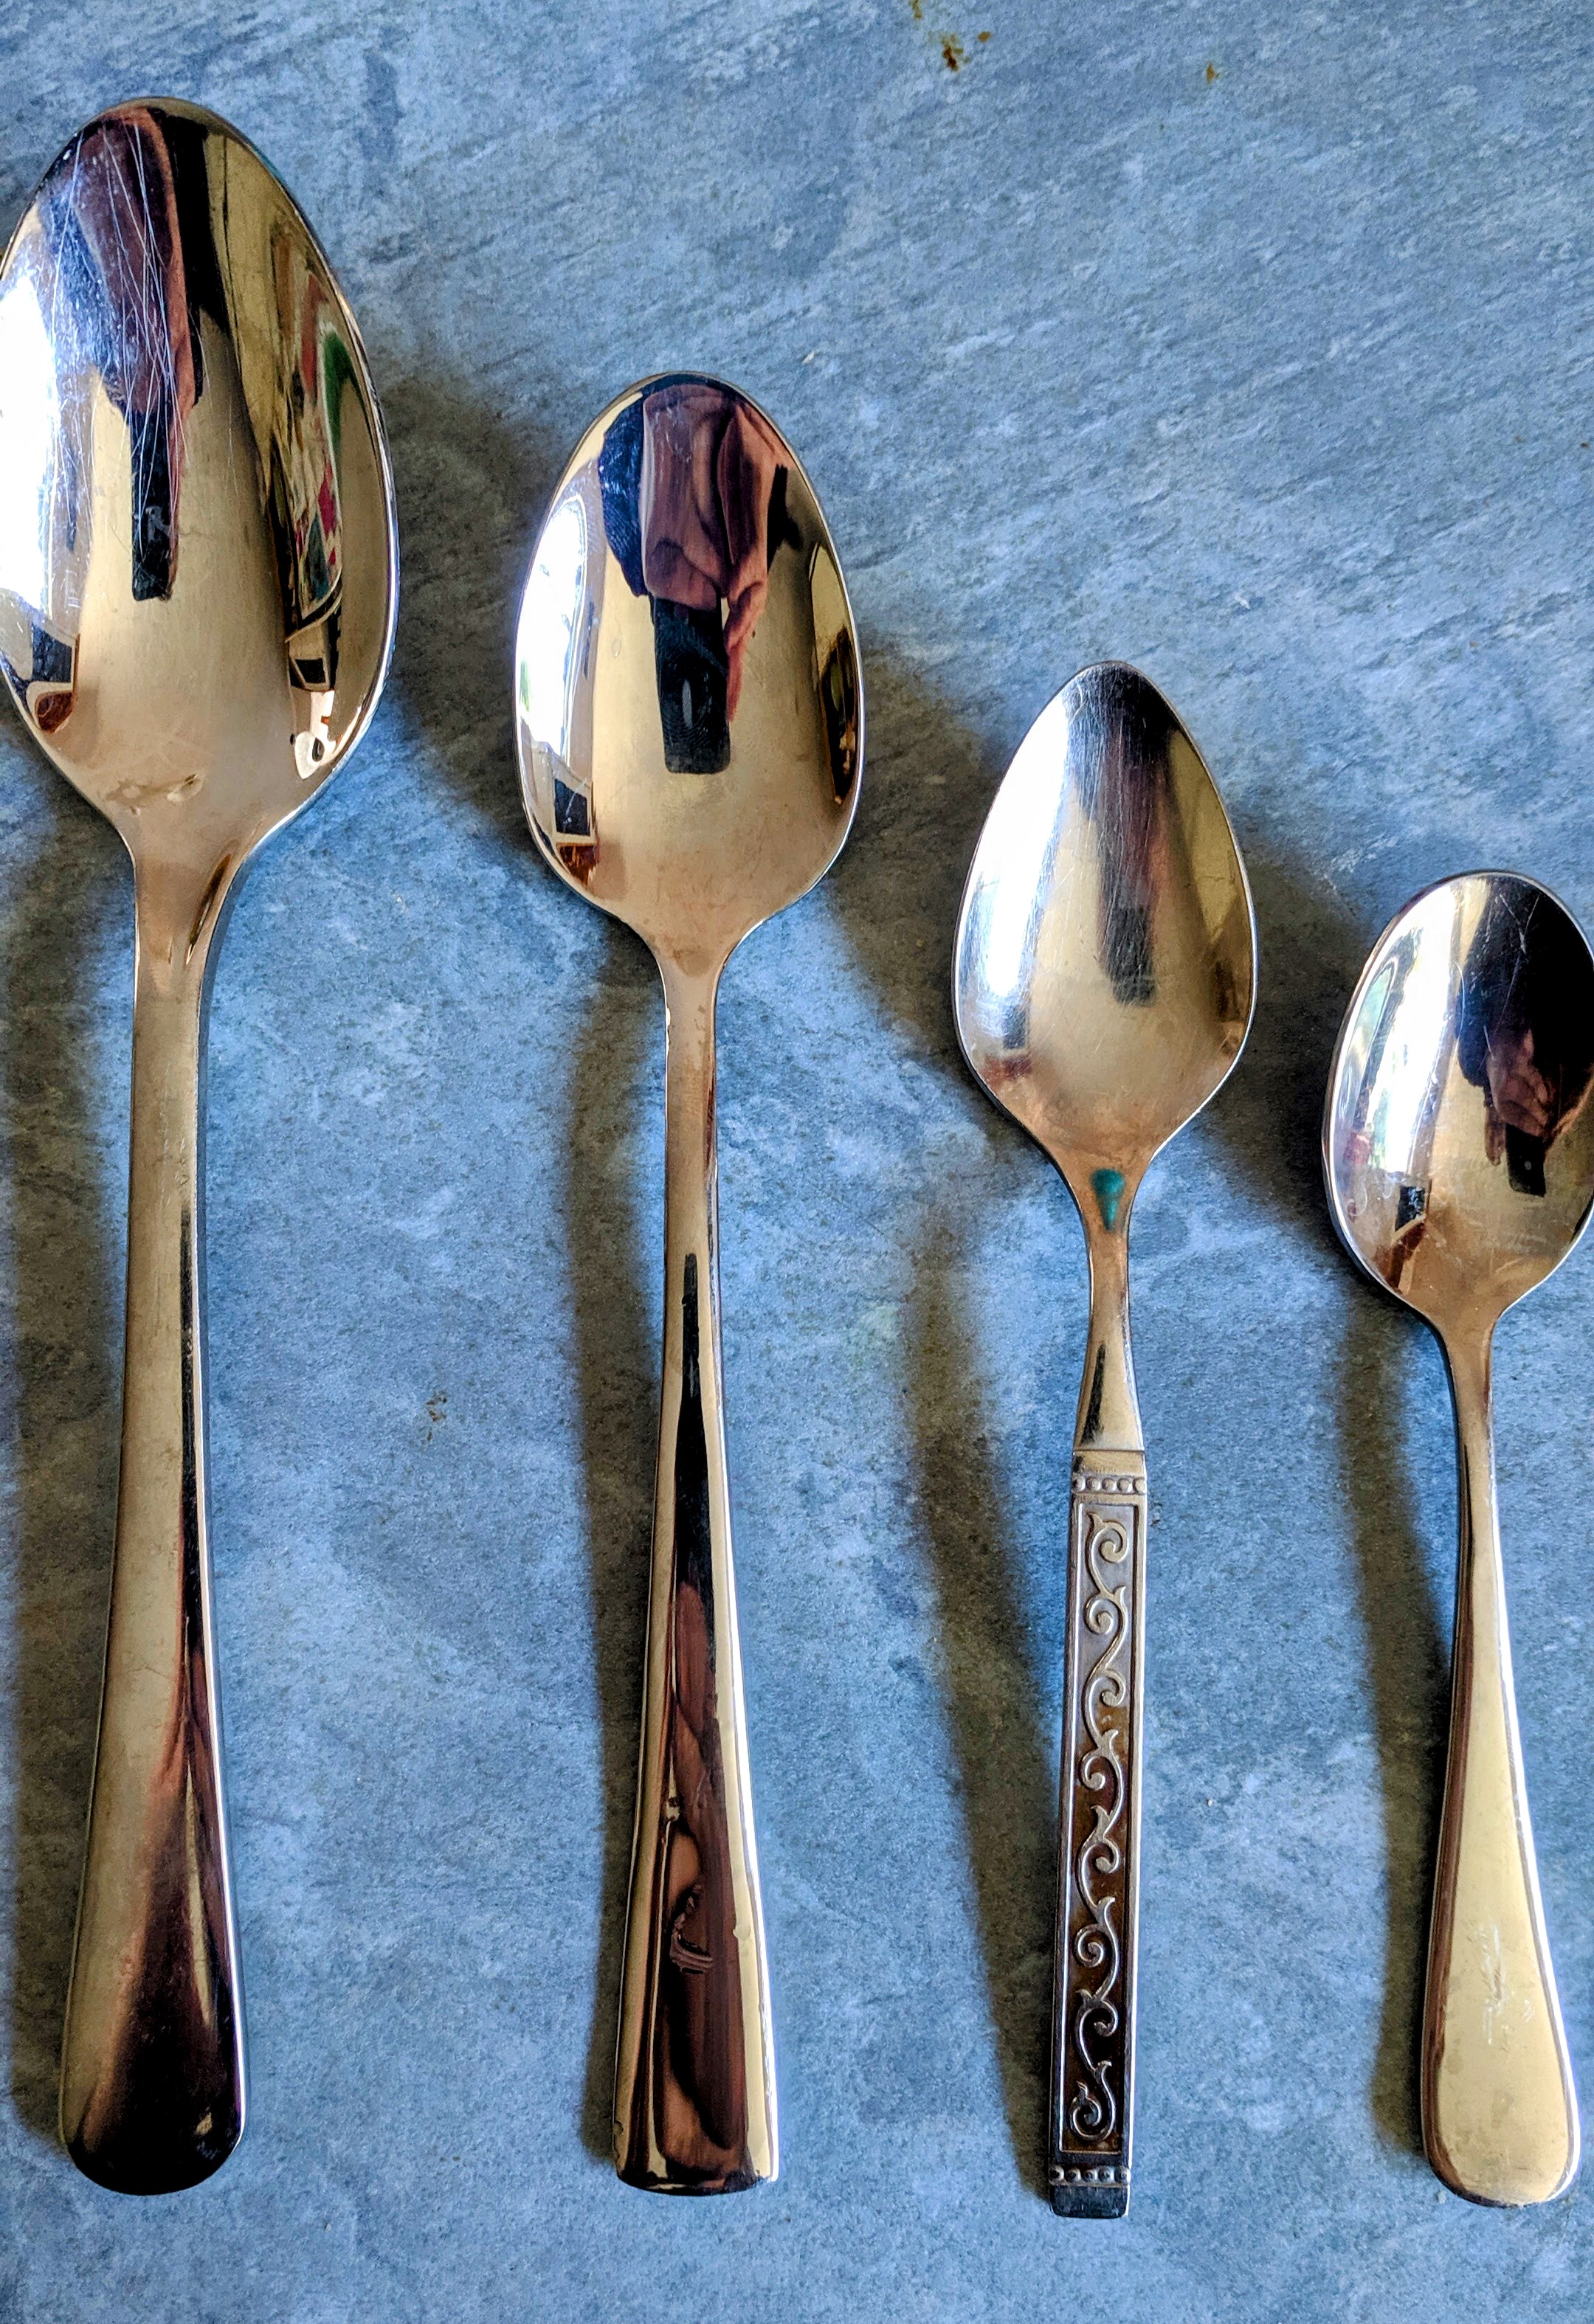 These are all teaspoons